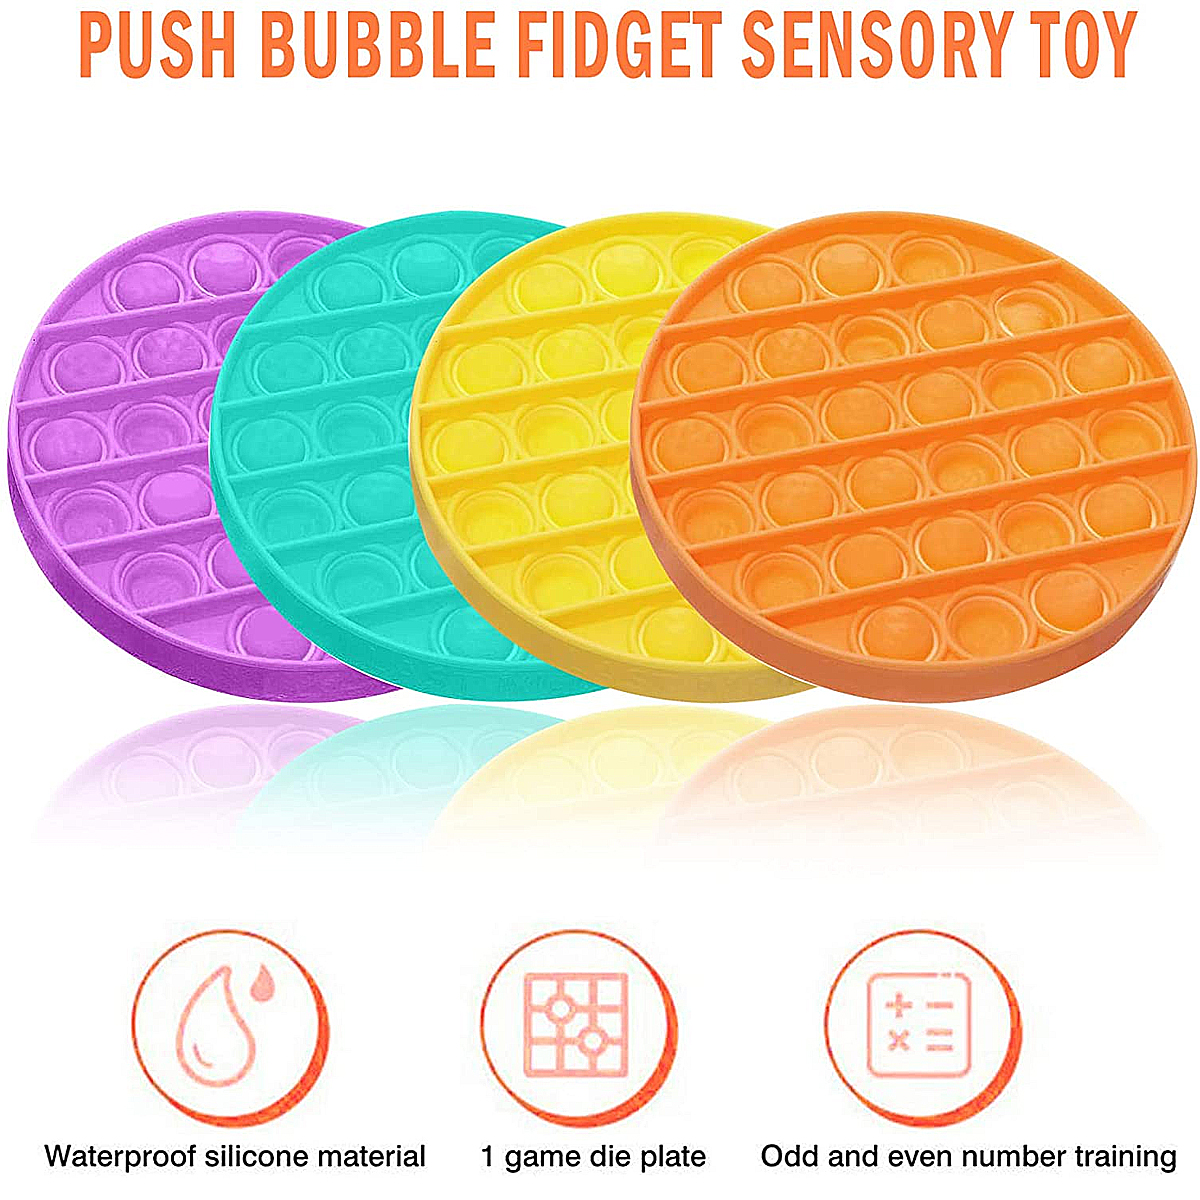 2021-Push-Bubble-Fidget-Sensory-Toy-Special-Needs-Stress-Reliever-Silent-Indoor-Toys-1818646-1